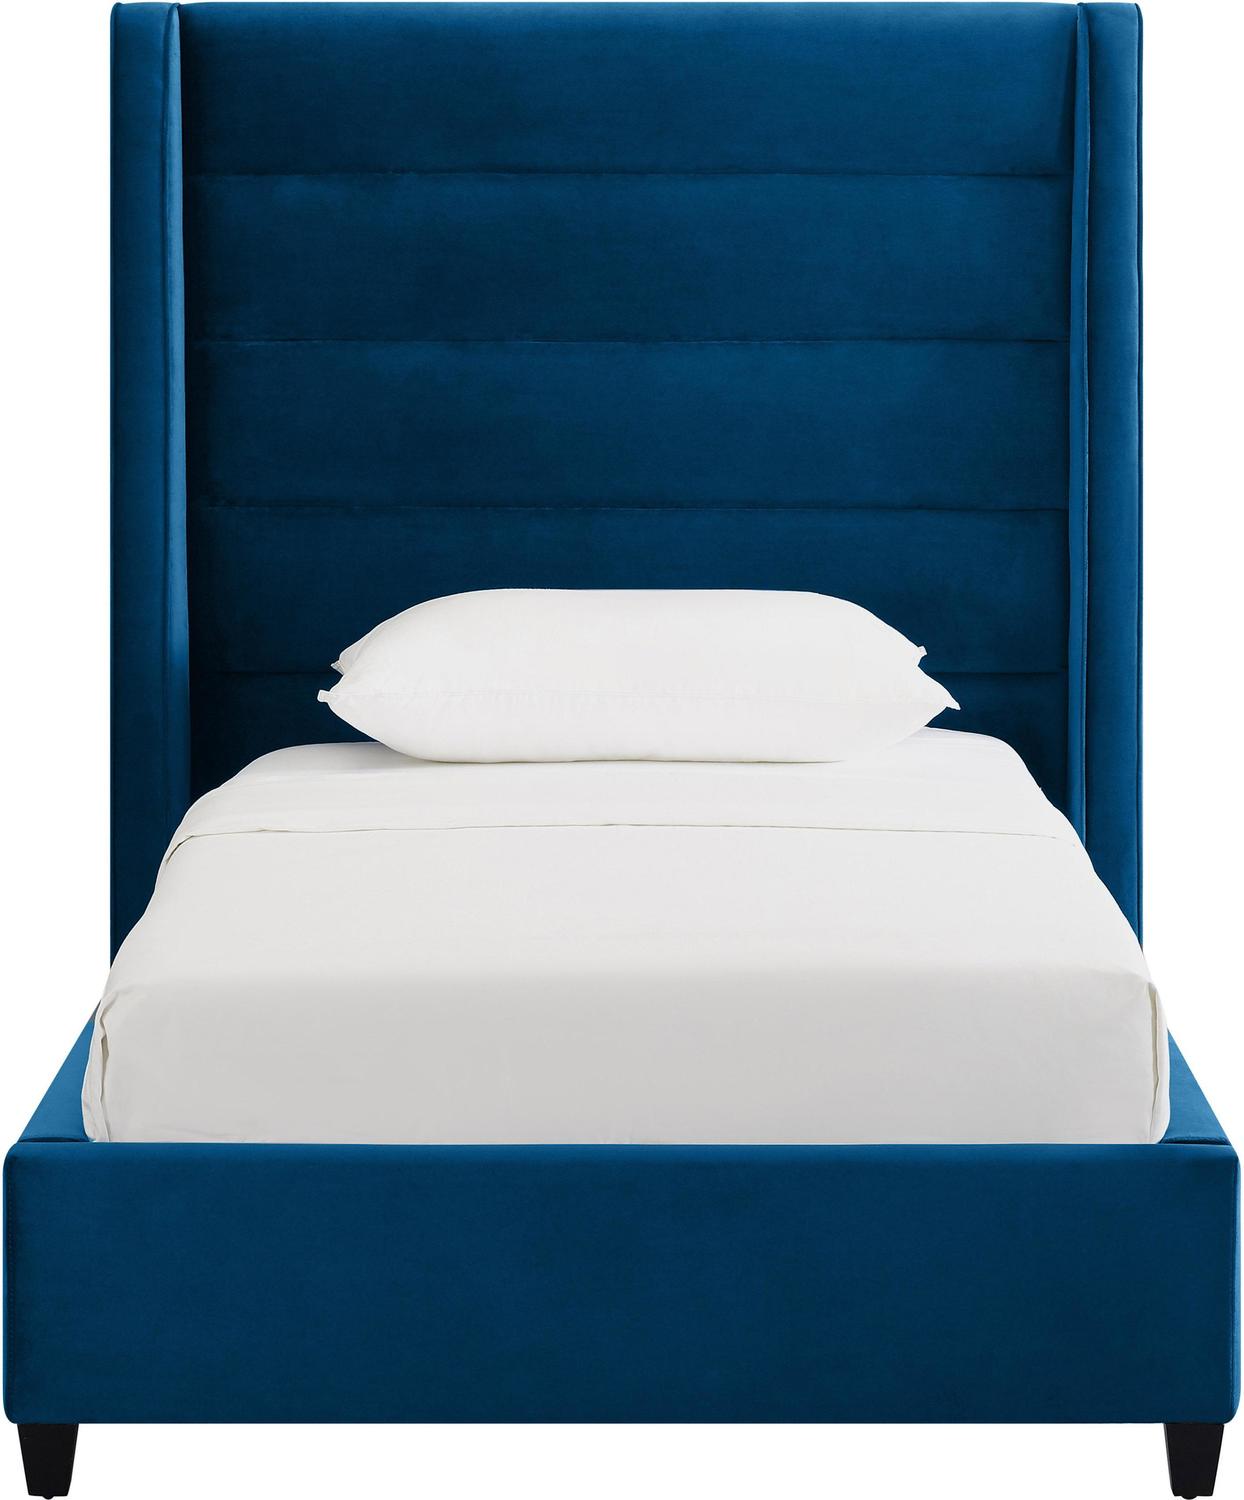 king bed and queen bed Tov Furniture Beds Beds Navy